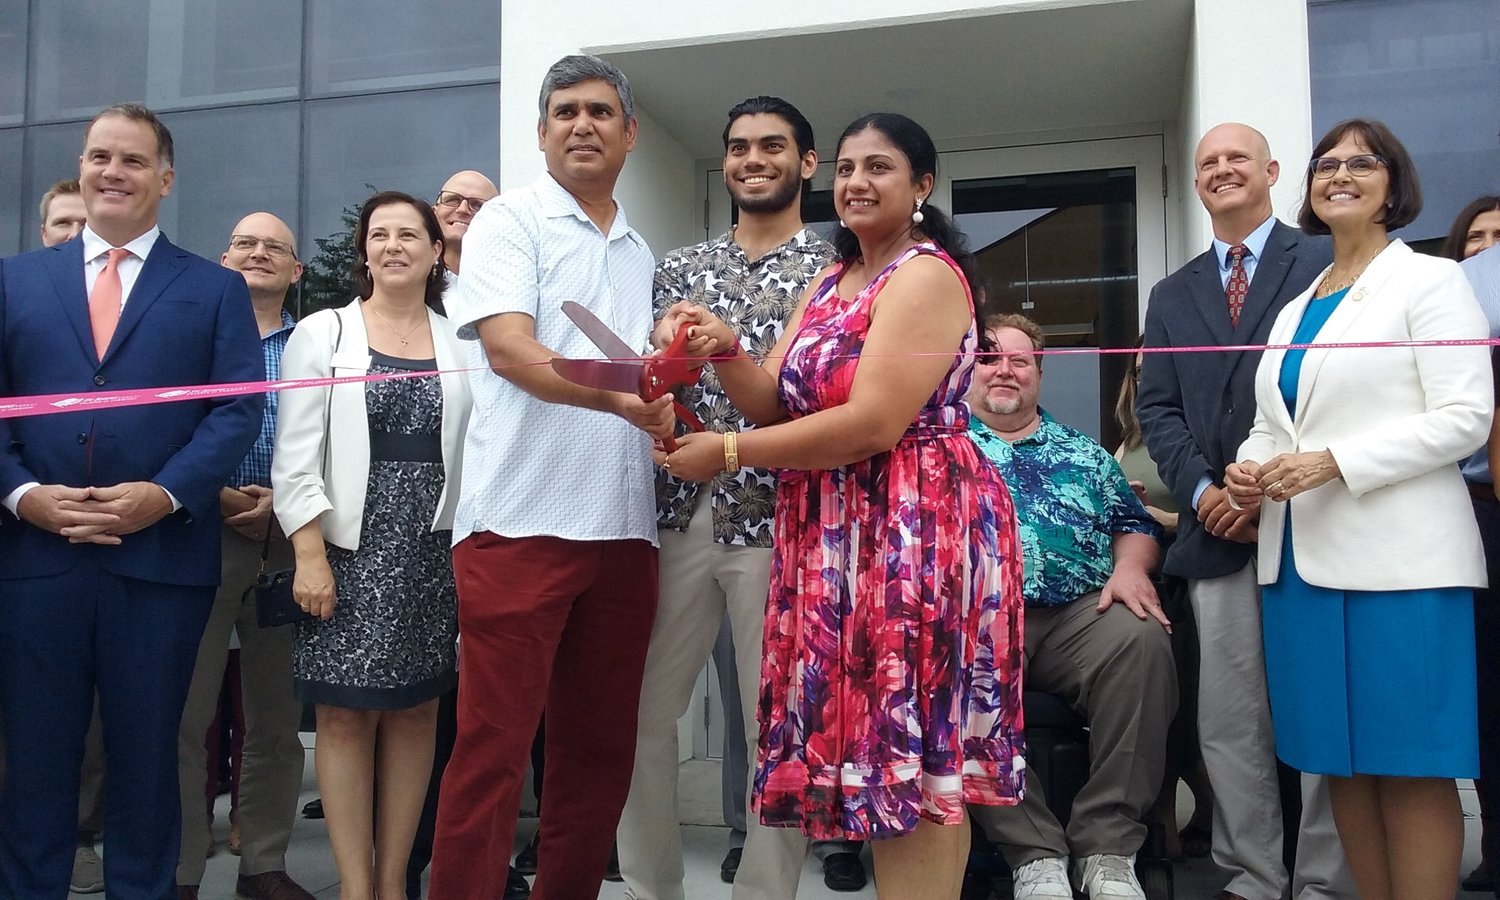 Raghu Misra, son Rohan Misra and wife Gurpreet Misra cut the ribbon on the link during grand opening festivities Wednesday, July 14.